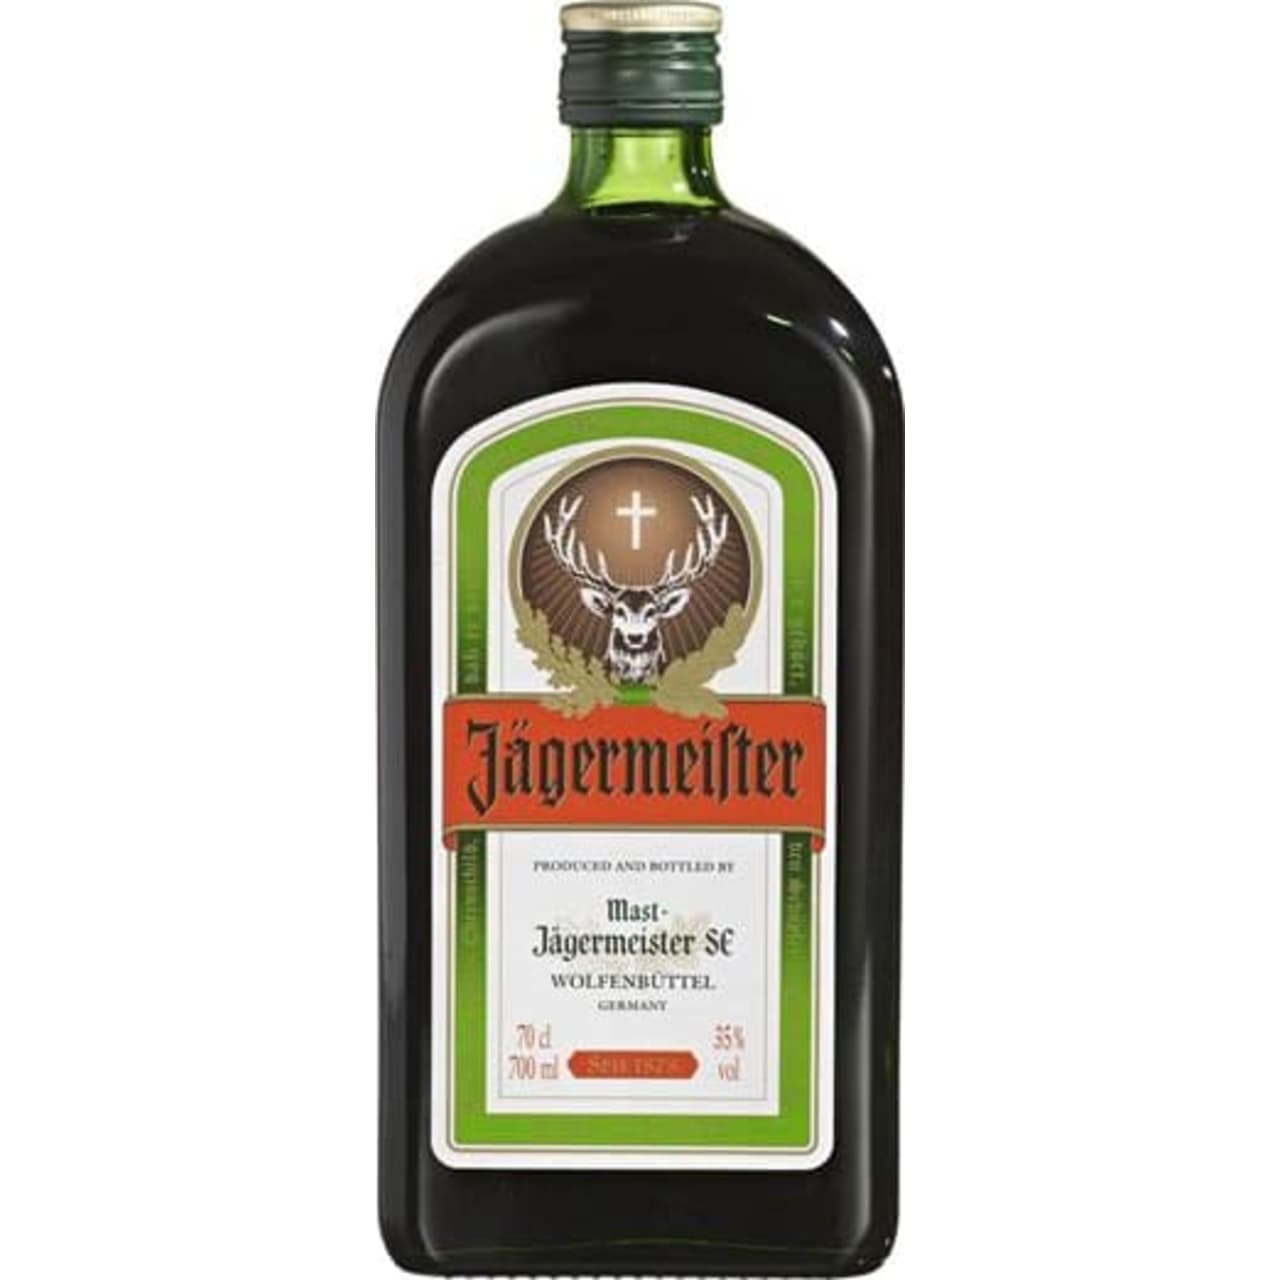 A German liqueur created by 56 naturally sourced botanicals of rare exotic herbs, spices, woods, fruits, blossoms, seeds and roots. These ingredients give jager a smooth, rich flavour with a distinctive bitter sweet finish.